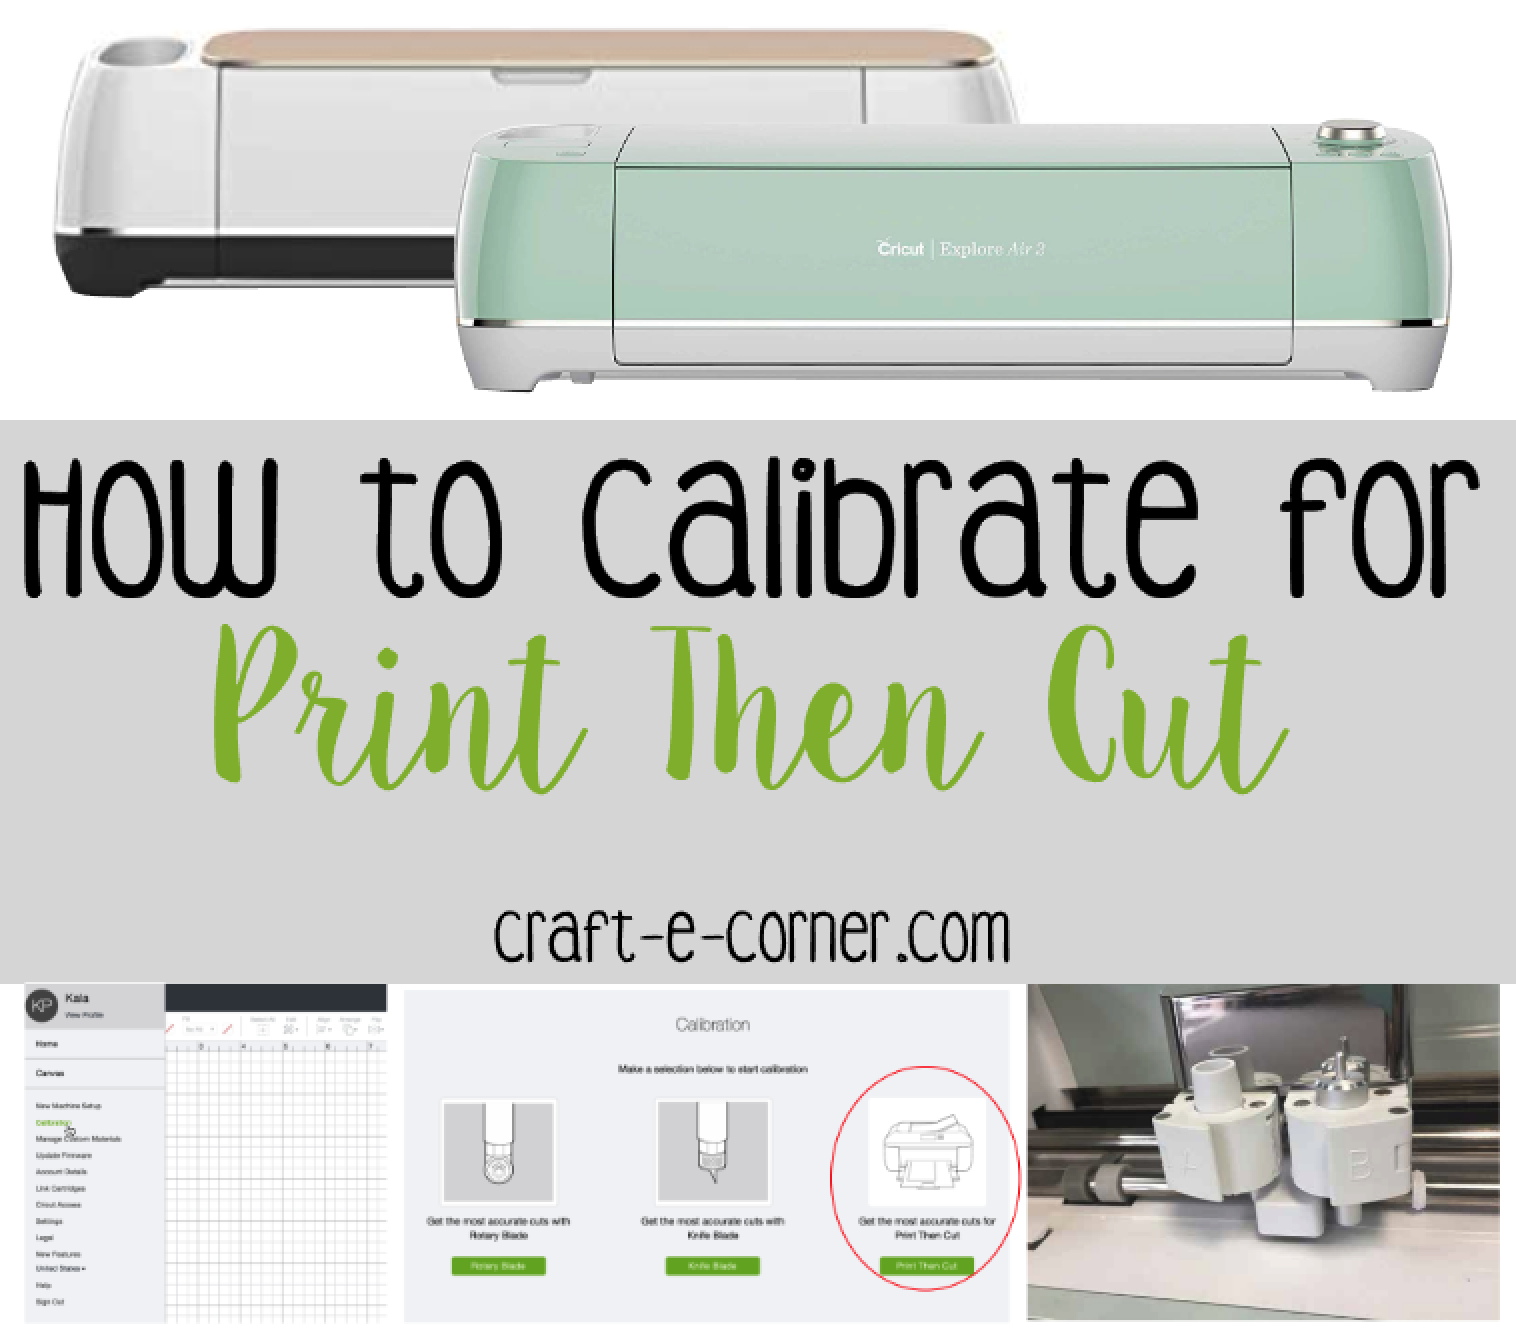 All About the Blades: How to Calibrate for Print Then Cut